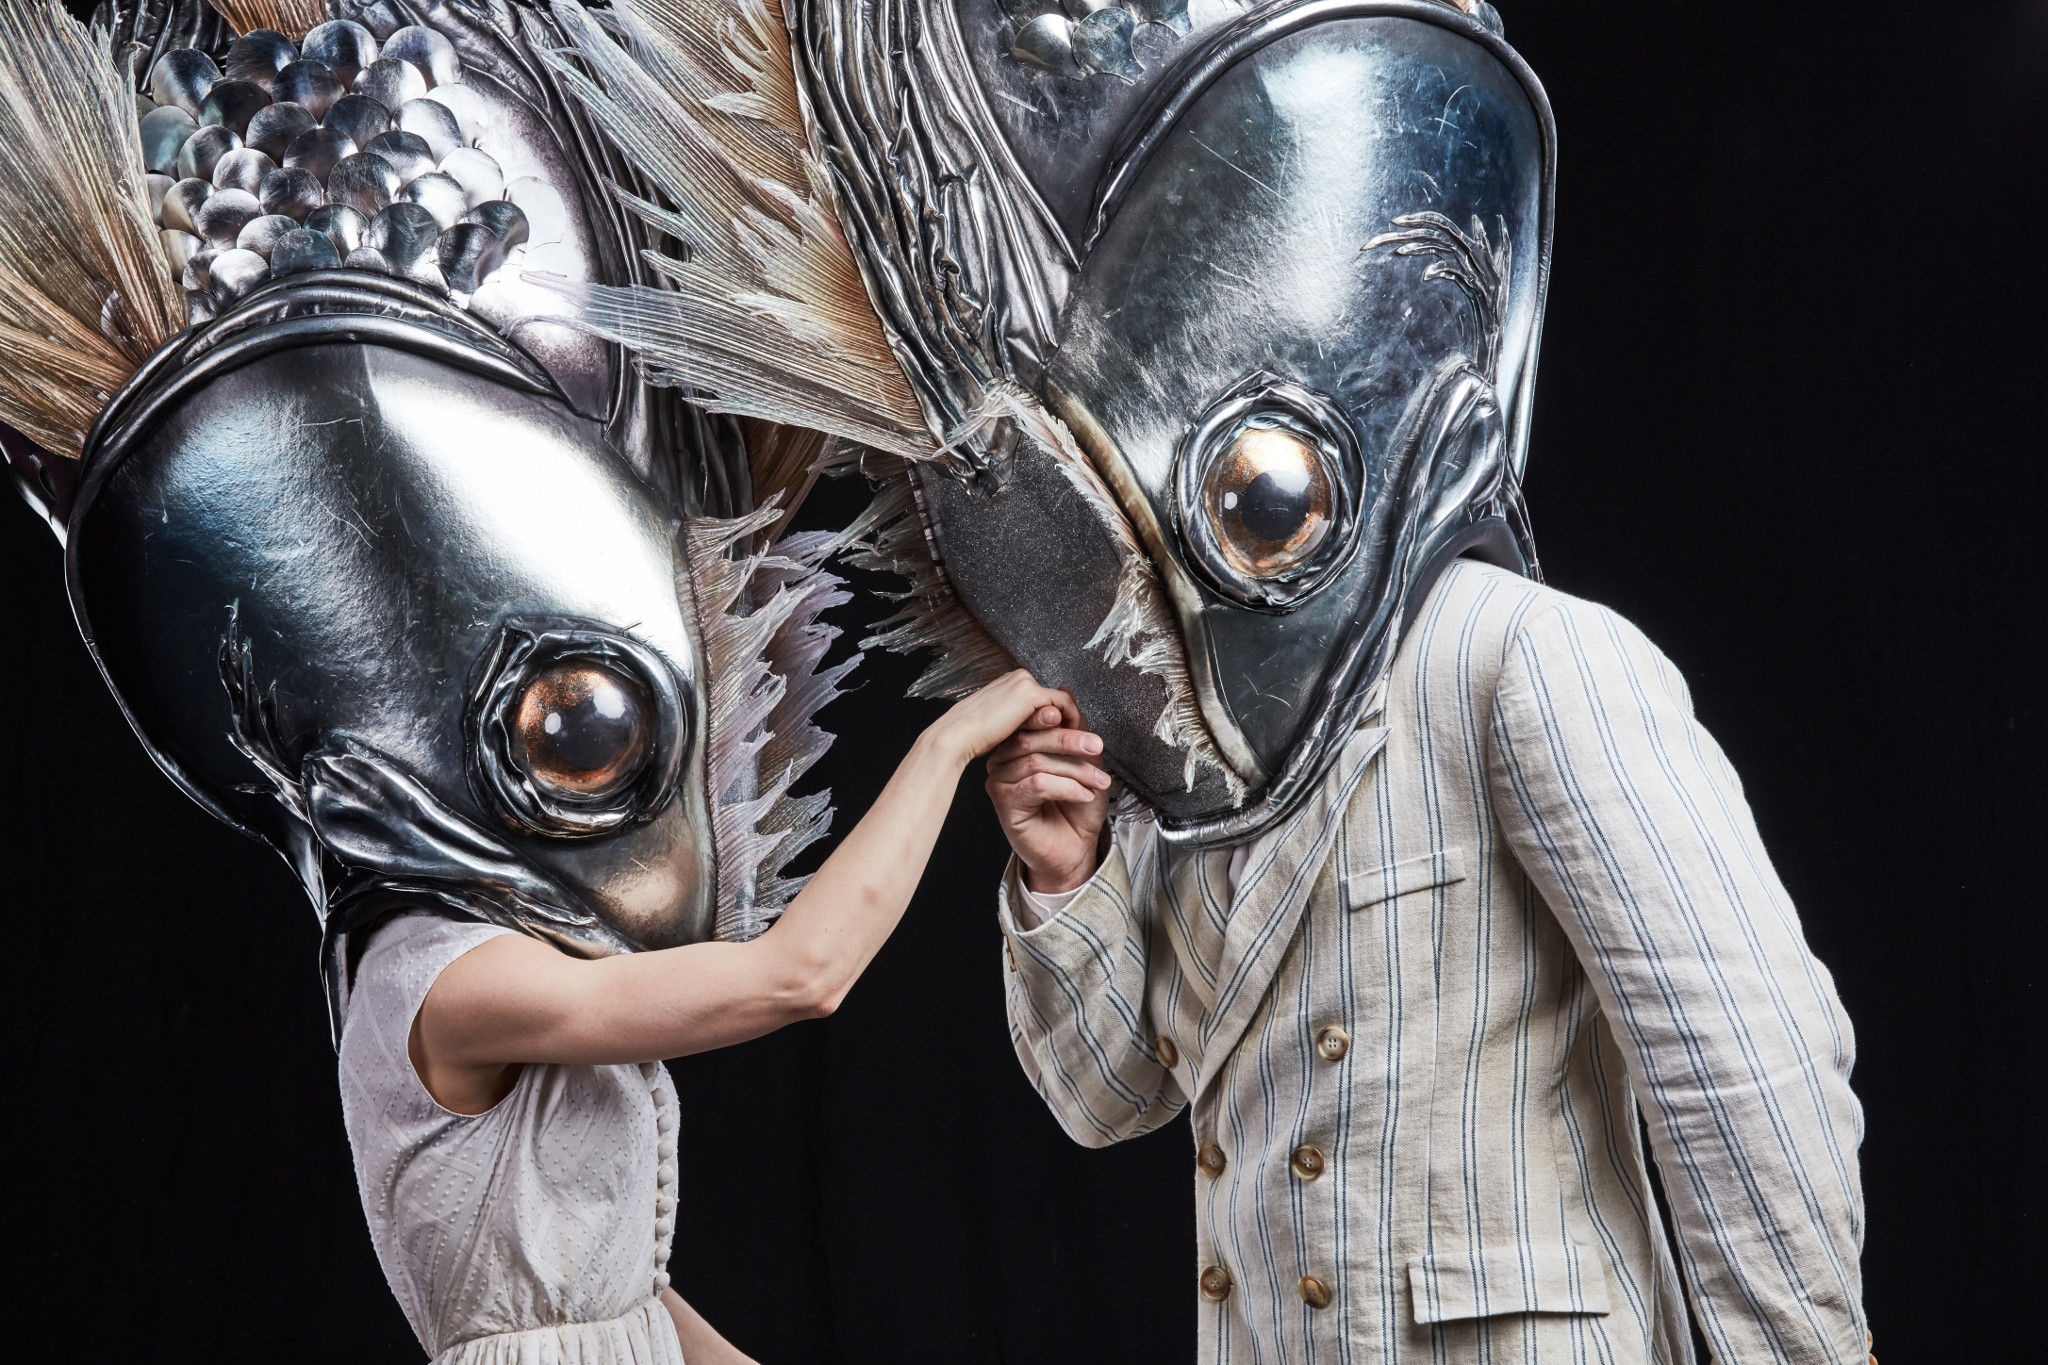 dancers in giant fish heads